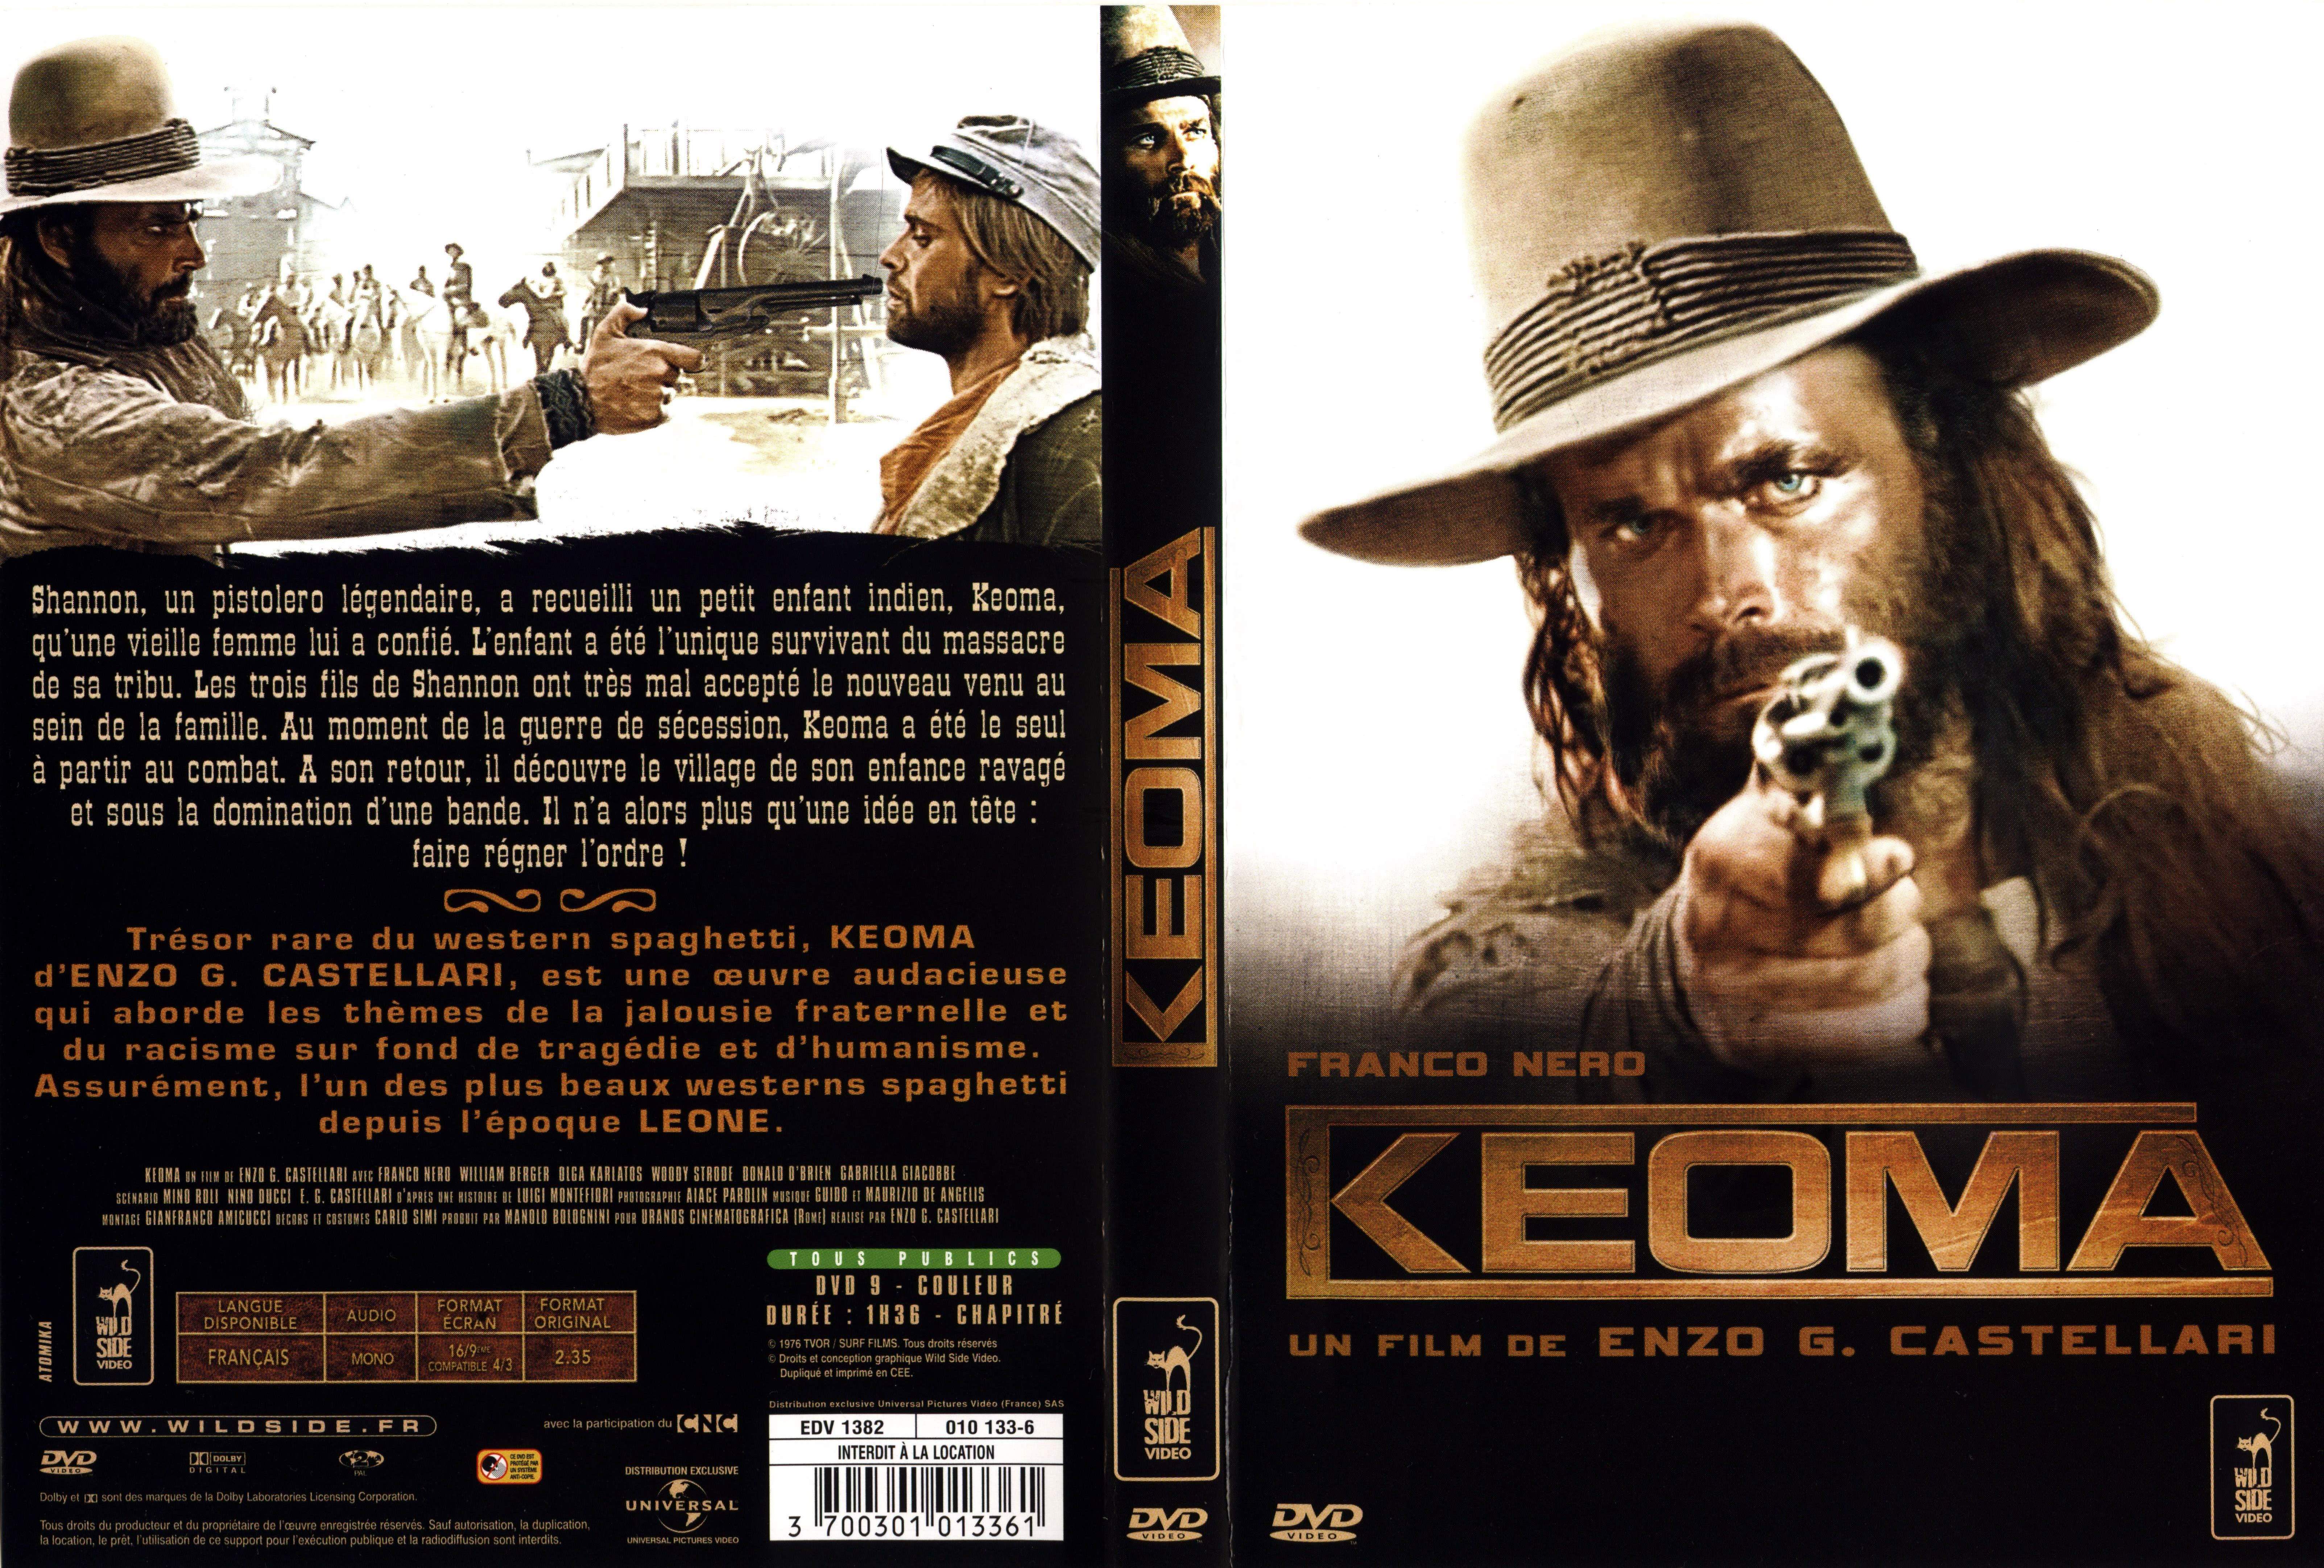 Jaquette DVD Keoma